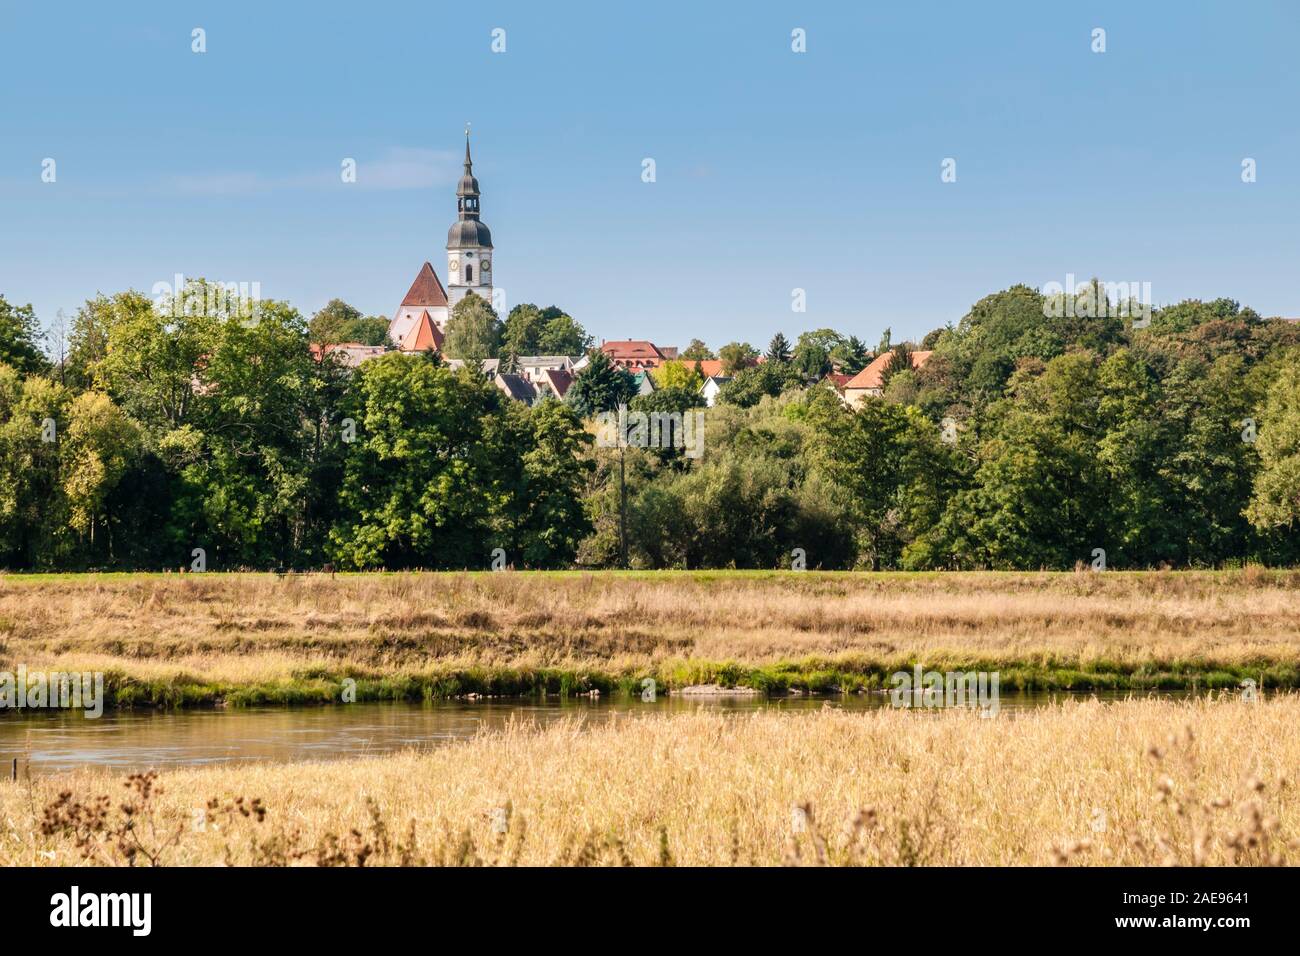 City of Strehla, church, banks of river Elbe, seen from Elbe cycle route on  eastside of river, Germany Stock Photo